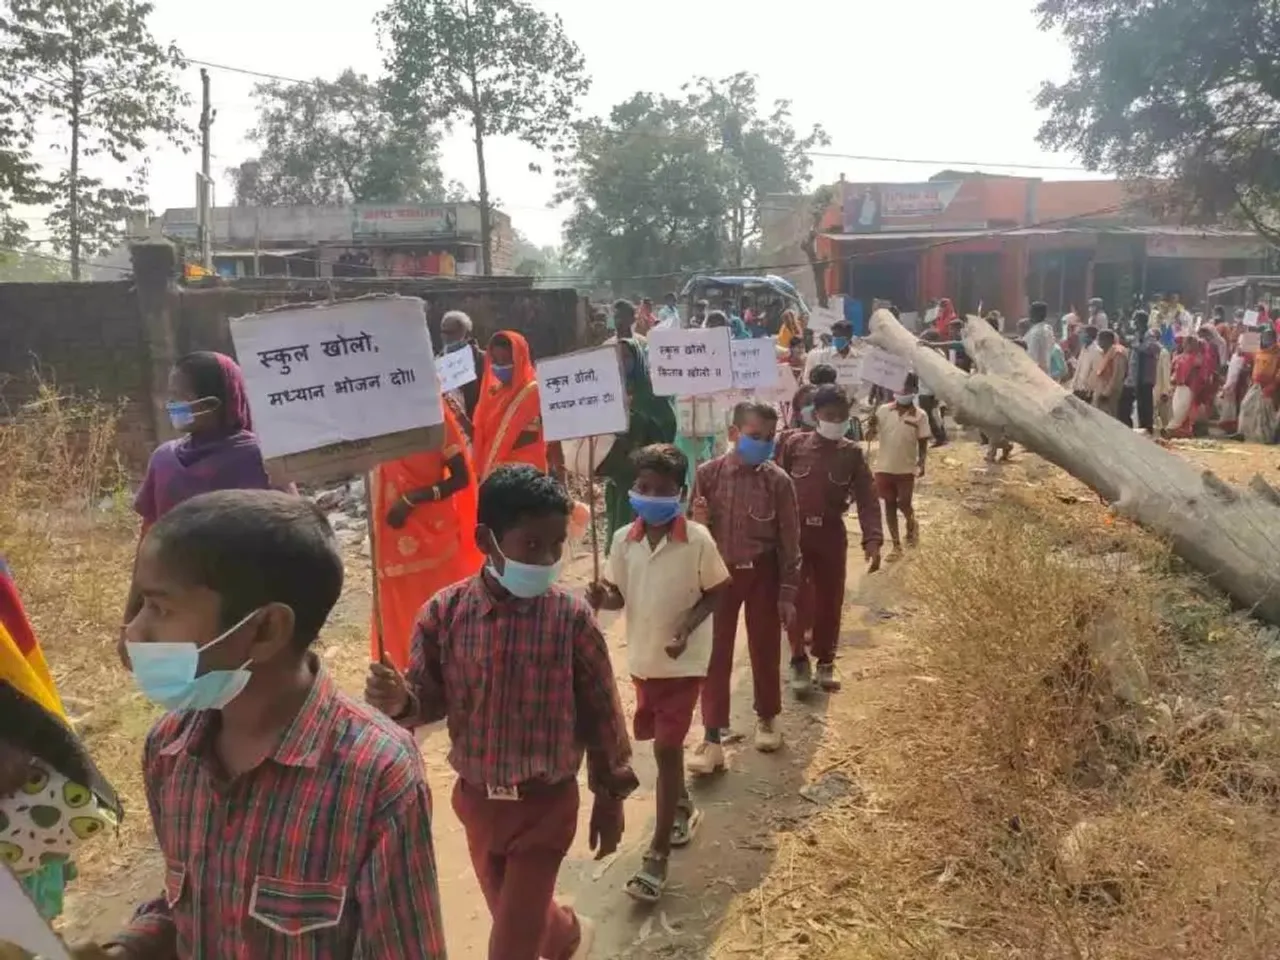 School Kholo Protest of Tribal students in Latehar, What are their demands?